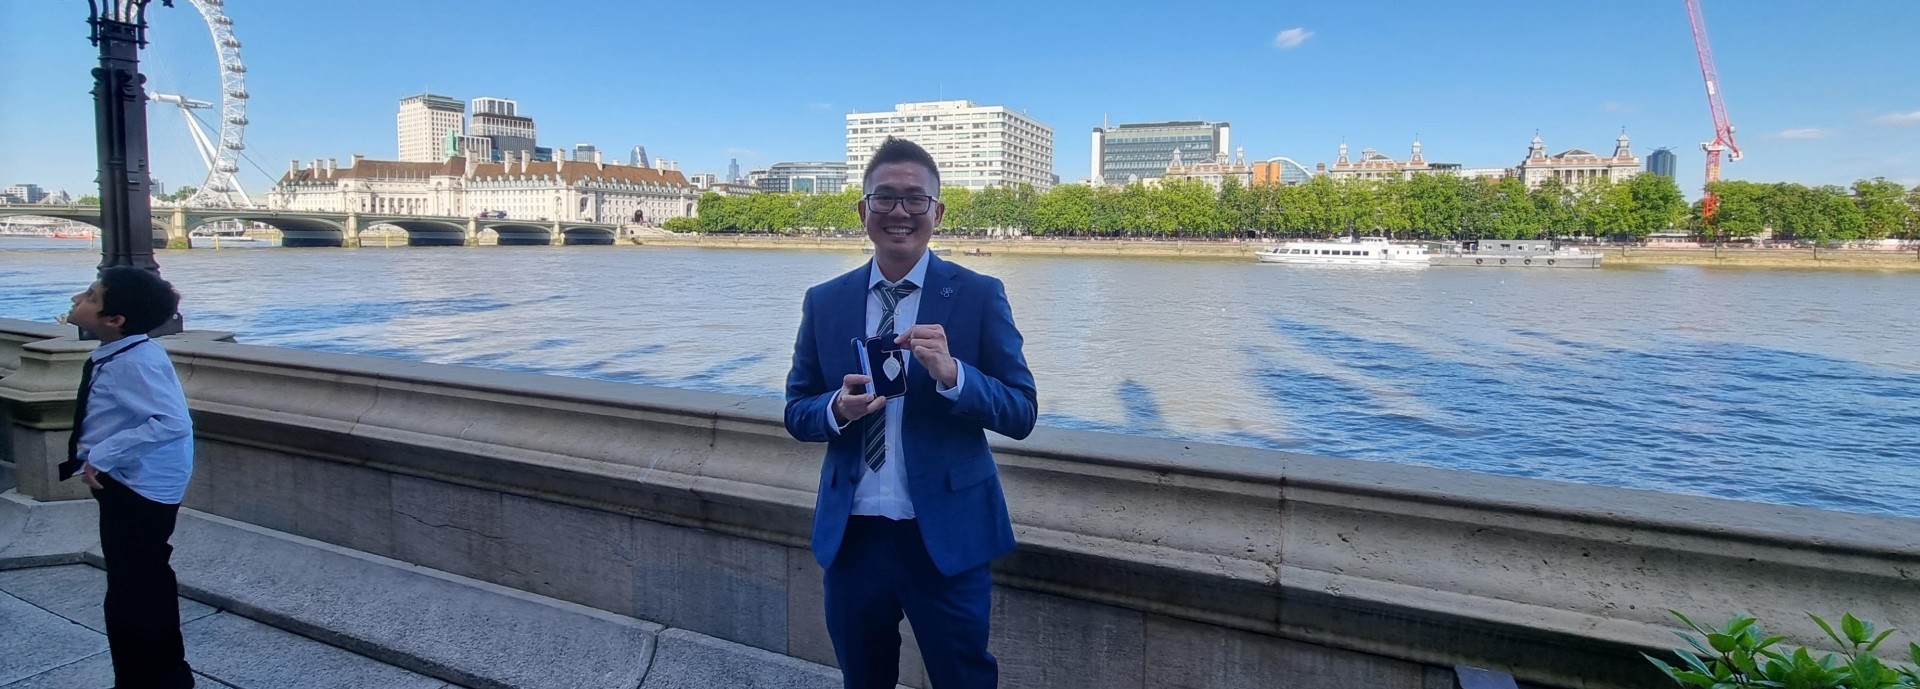 Nicolas Kee Mew stands in front of the River Thames, London holding his medal